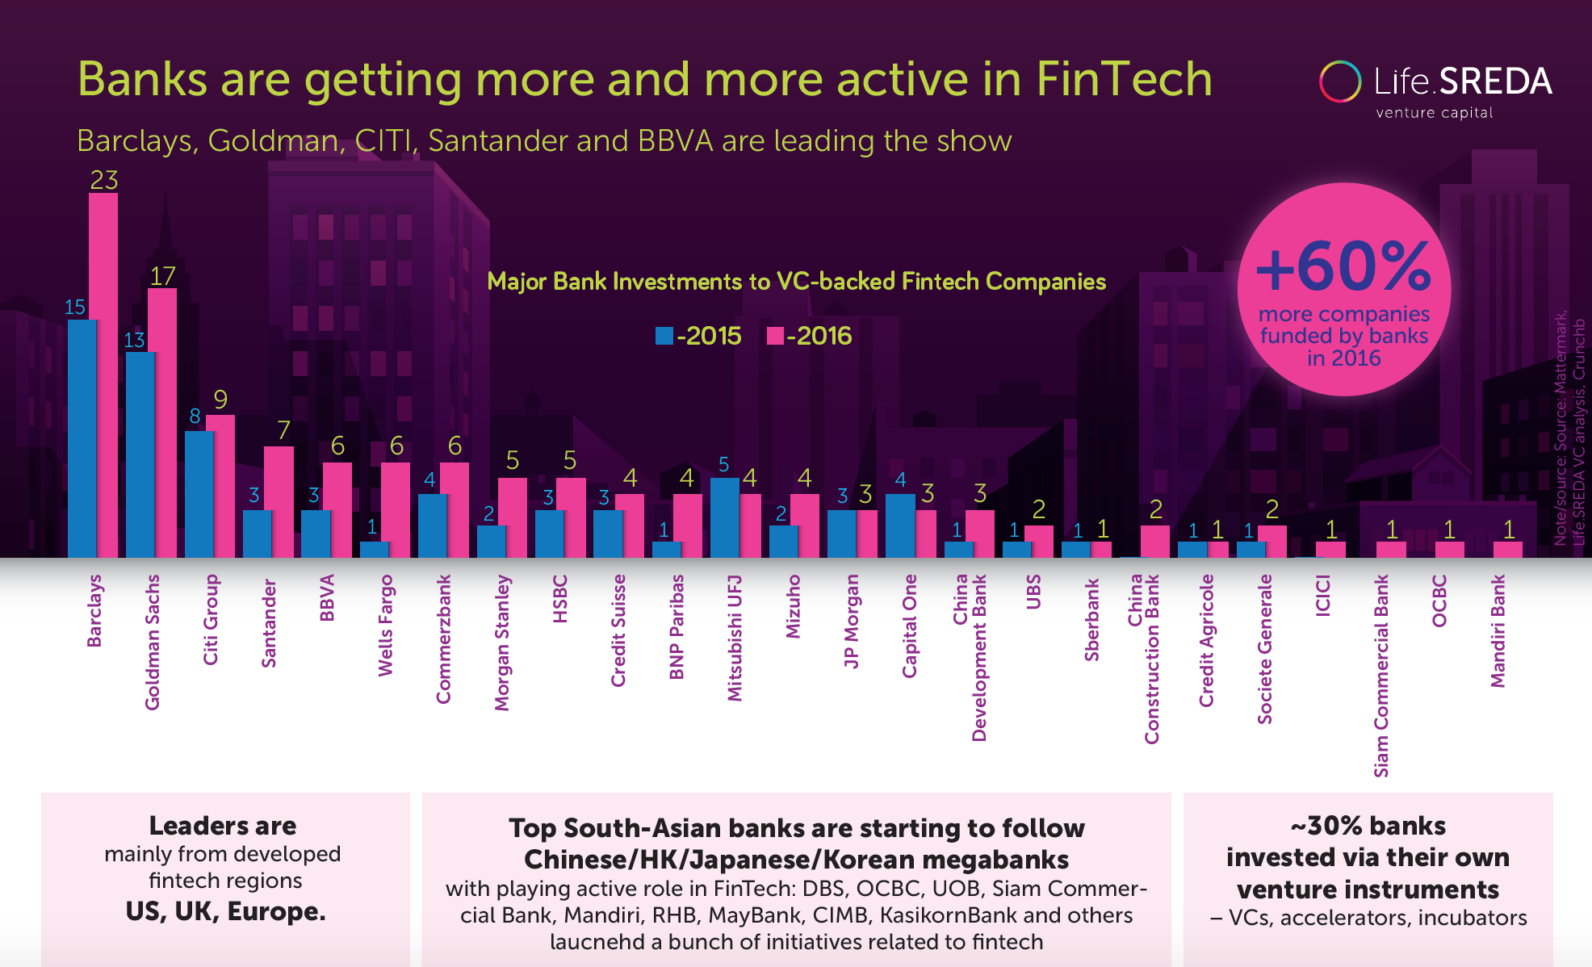 60% more fintechs were funded by banks